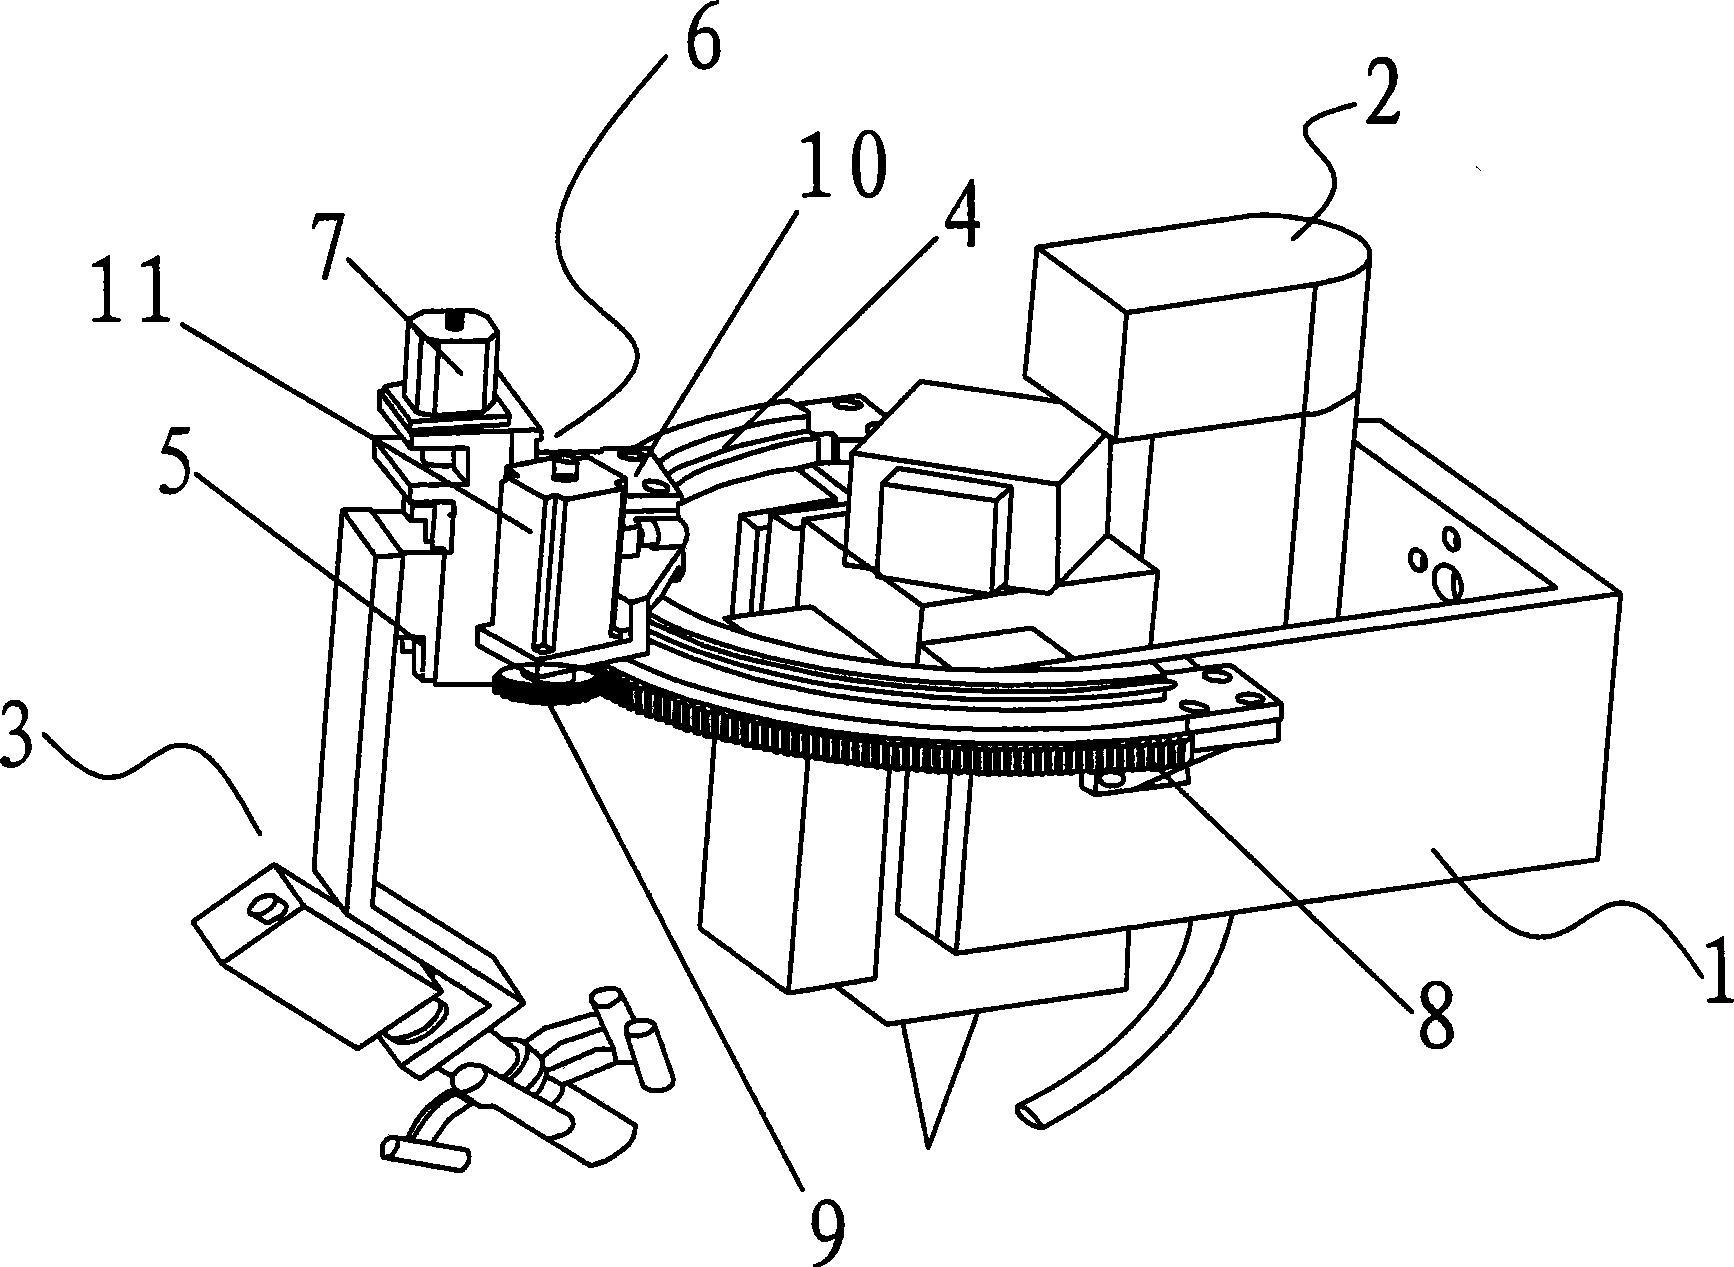 Integrated type laser welding and measurement integrated device